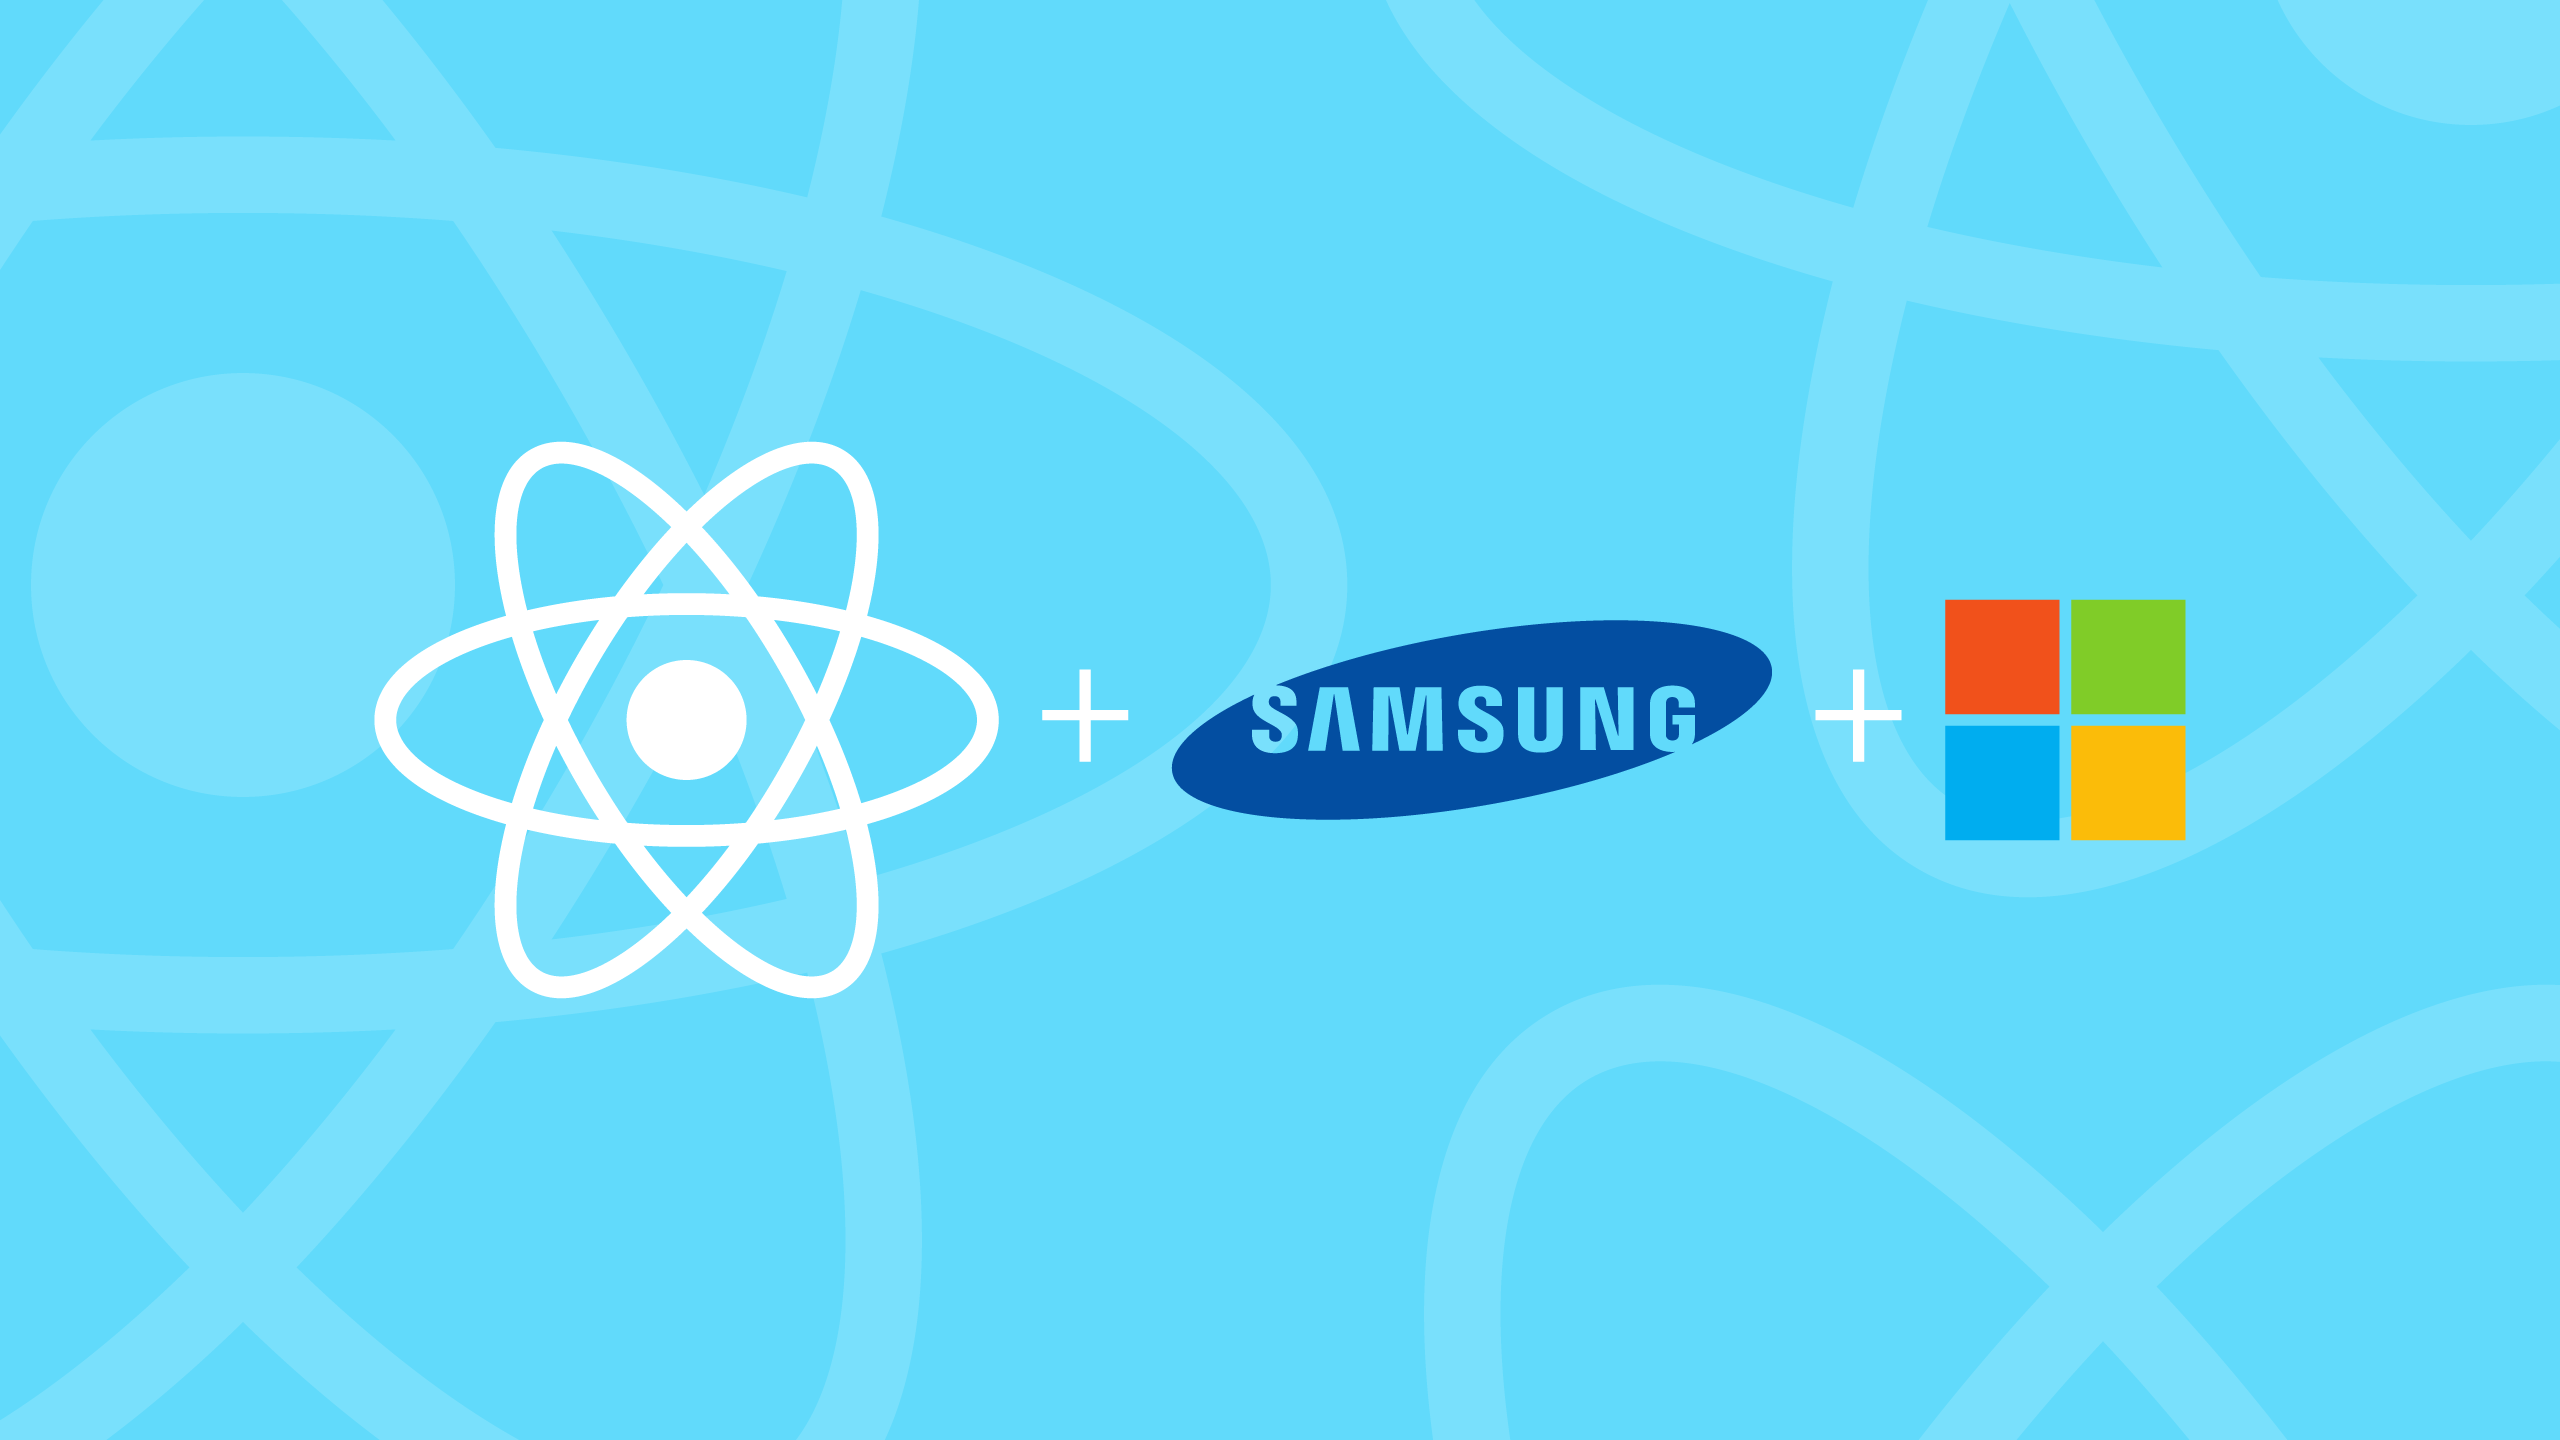 Facebook's React Native gets backing from Microsoft and Samsung | TechCrunch